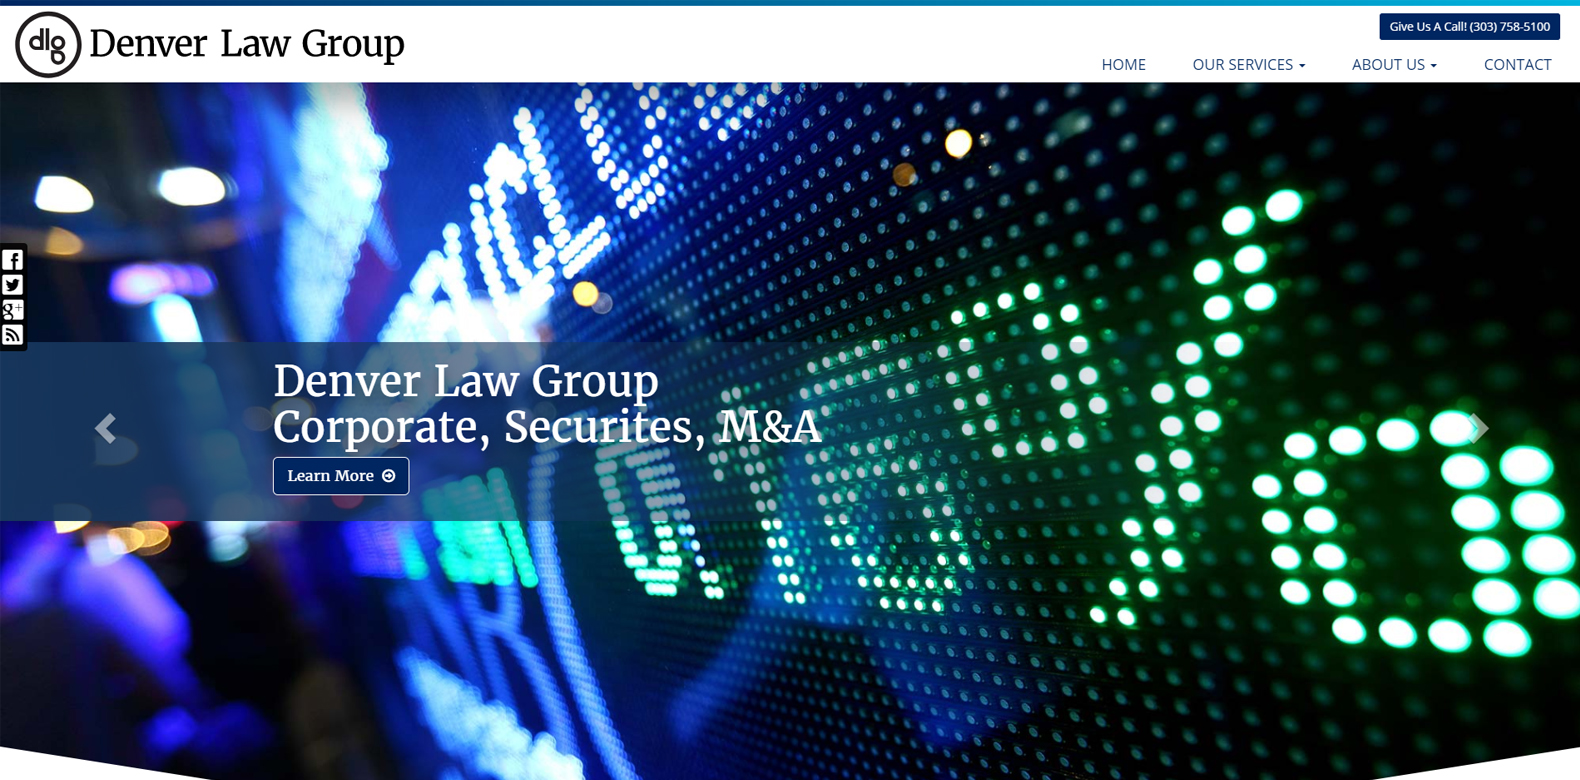 
New Website Launch: DLG Law Group